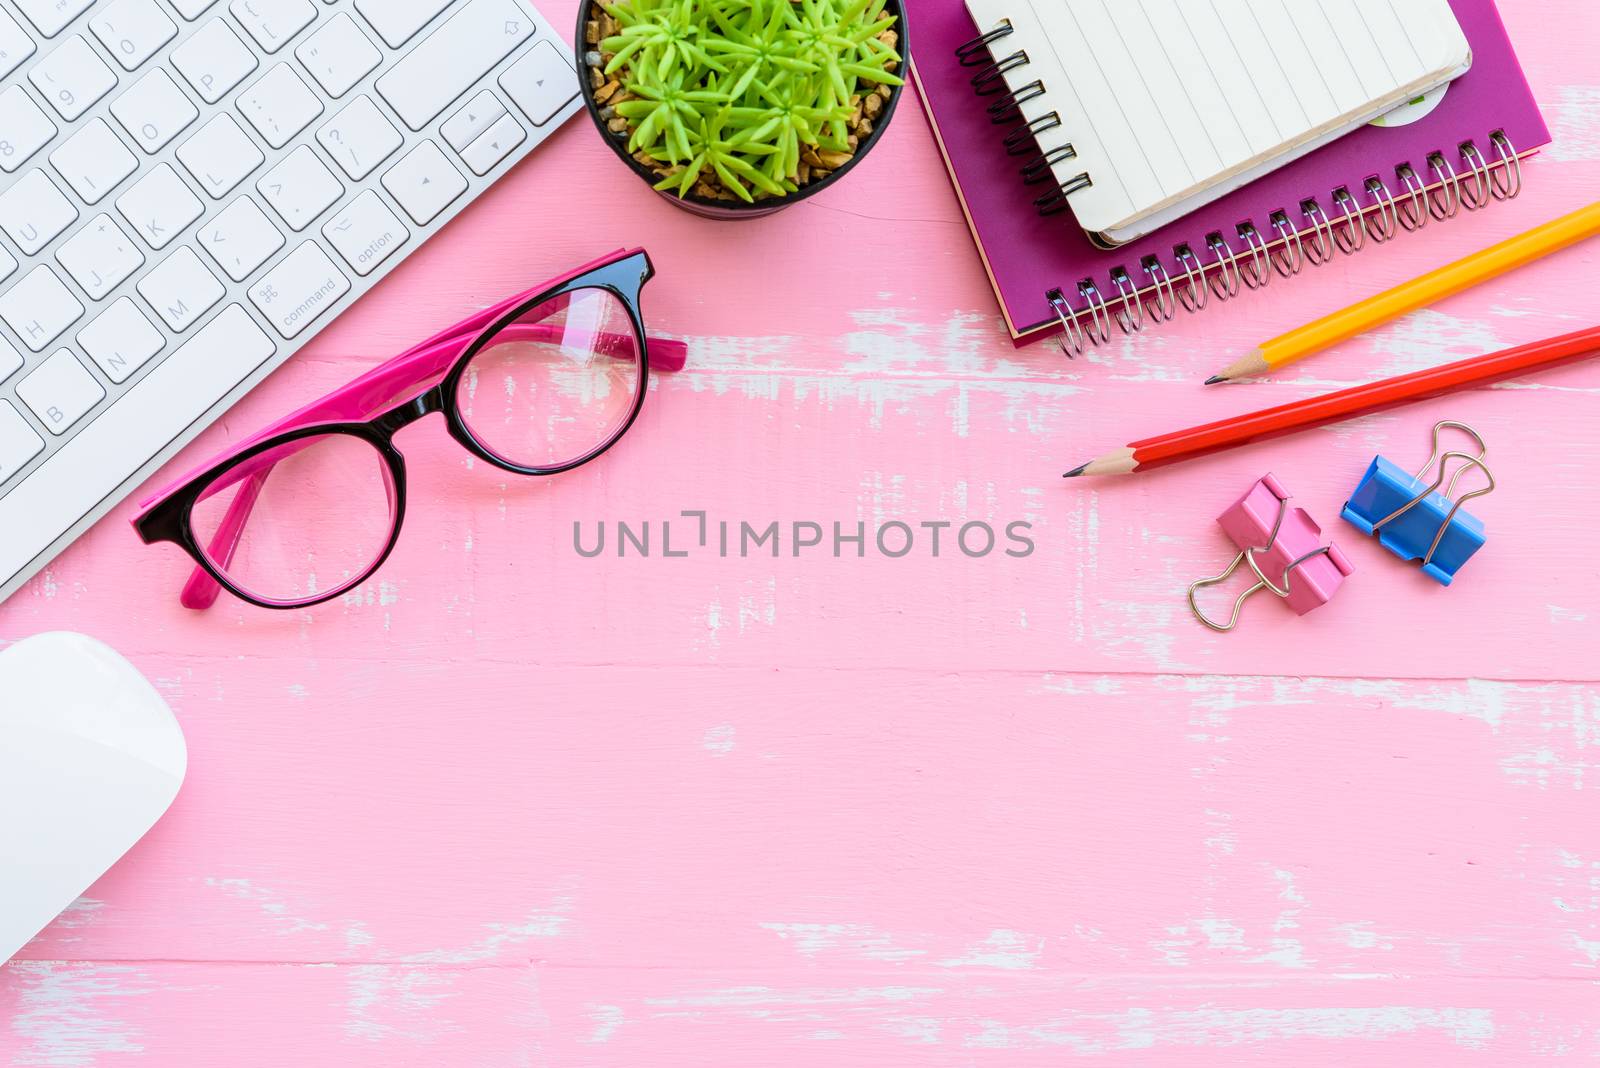 Top view office table with workspace and office accessories including calculator, mouse, keyboard, glasses, clips, flower, pen, pencil, note book, laptop and coffee on pink wooden background.